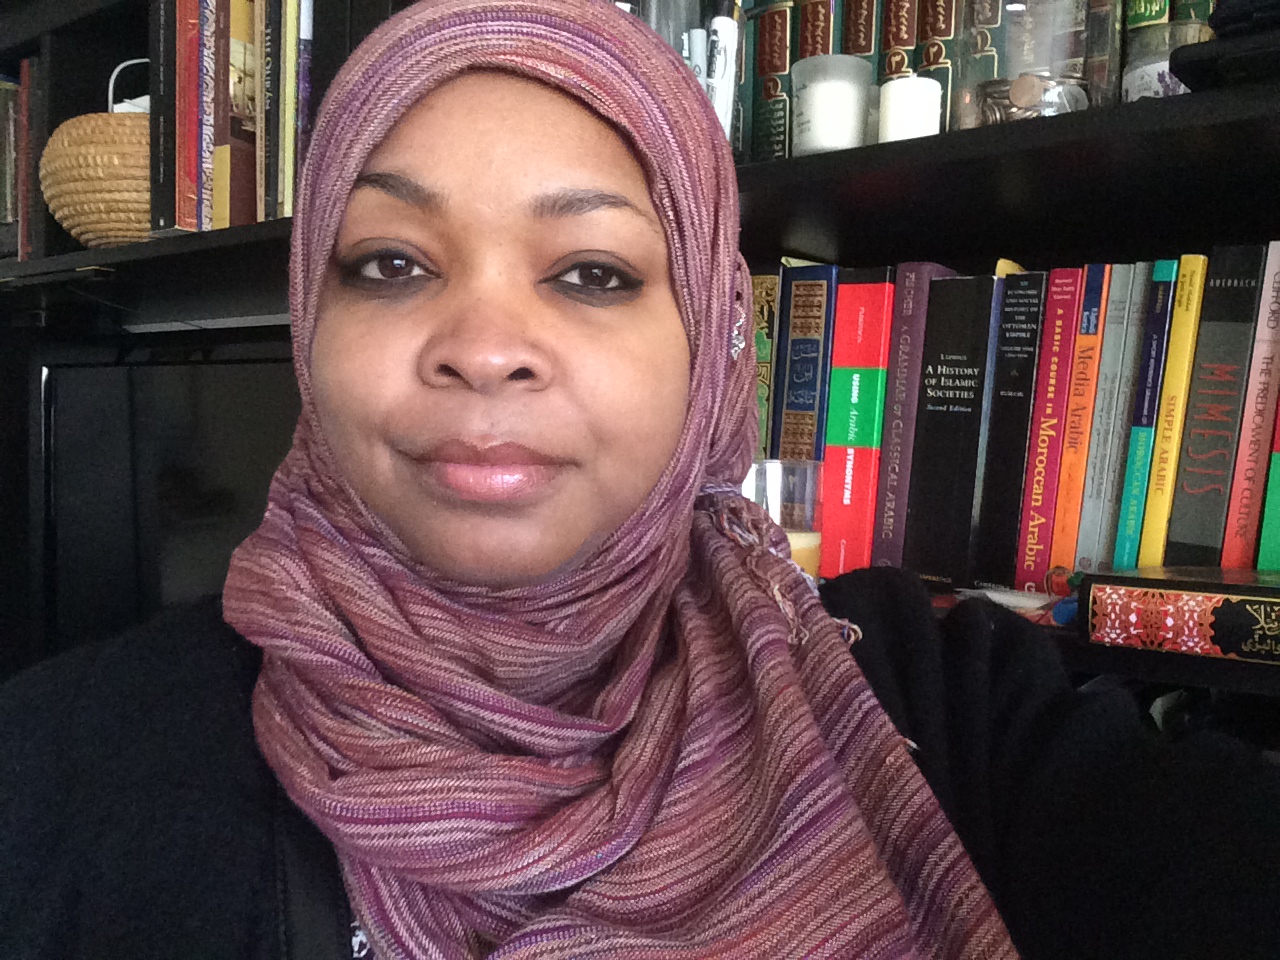 An American Muslim and Micro-Aggressions